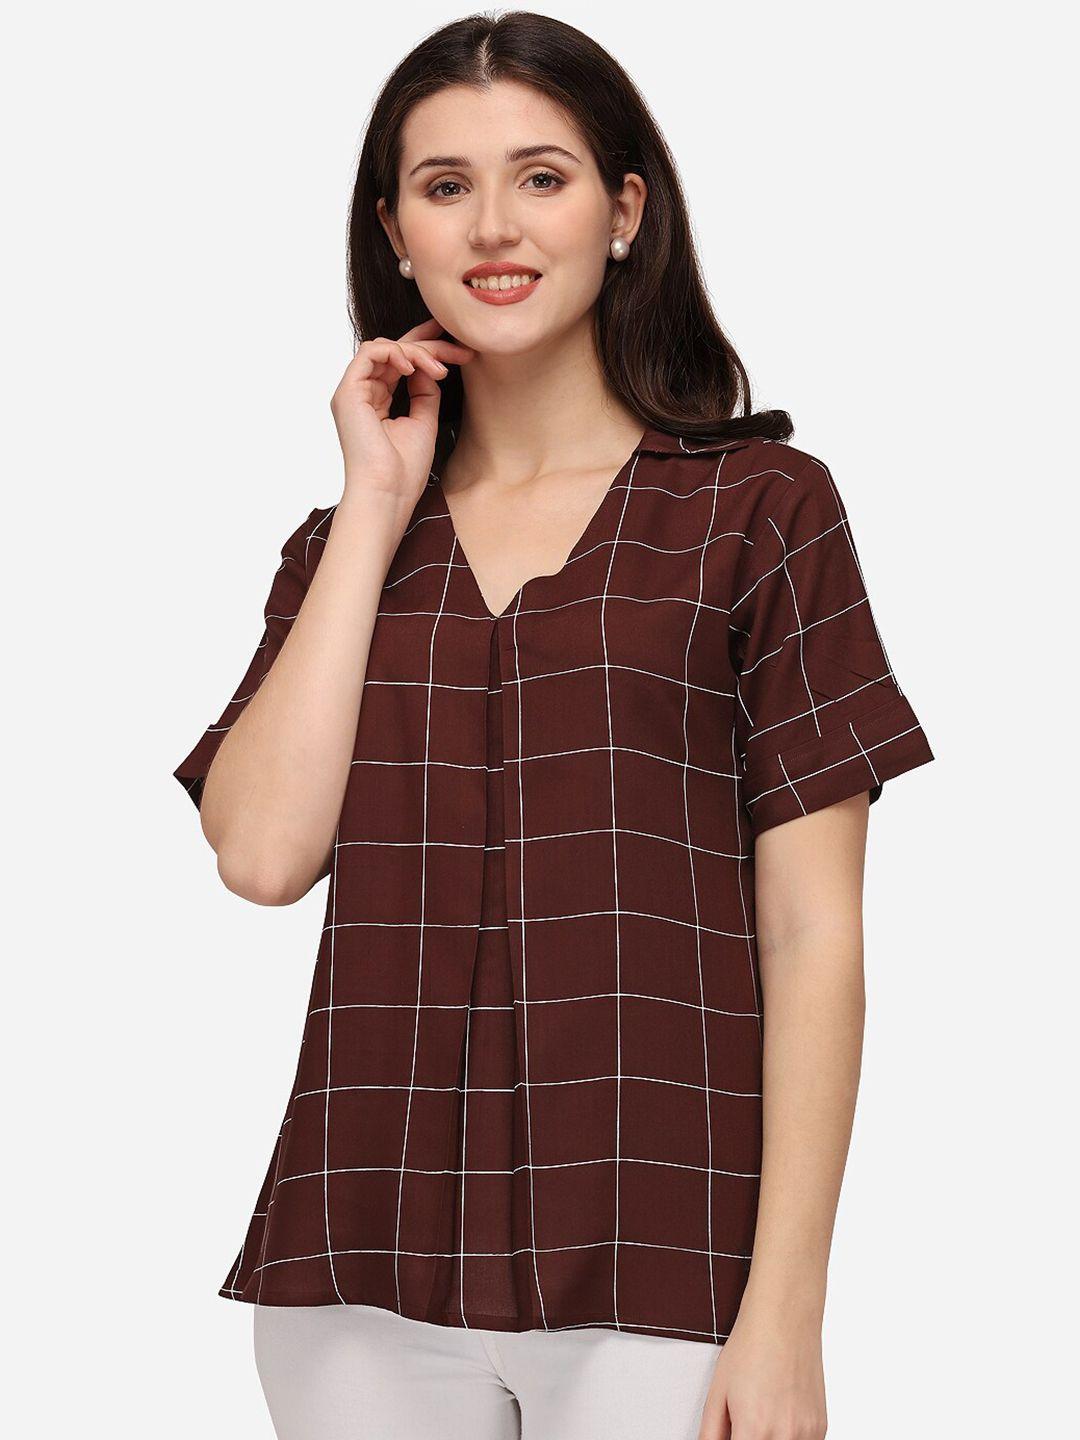 smarty pants brown & white checked top